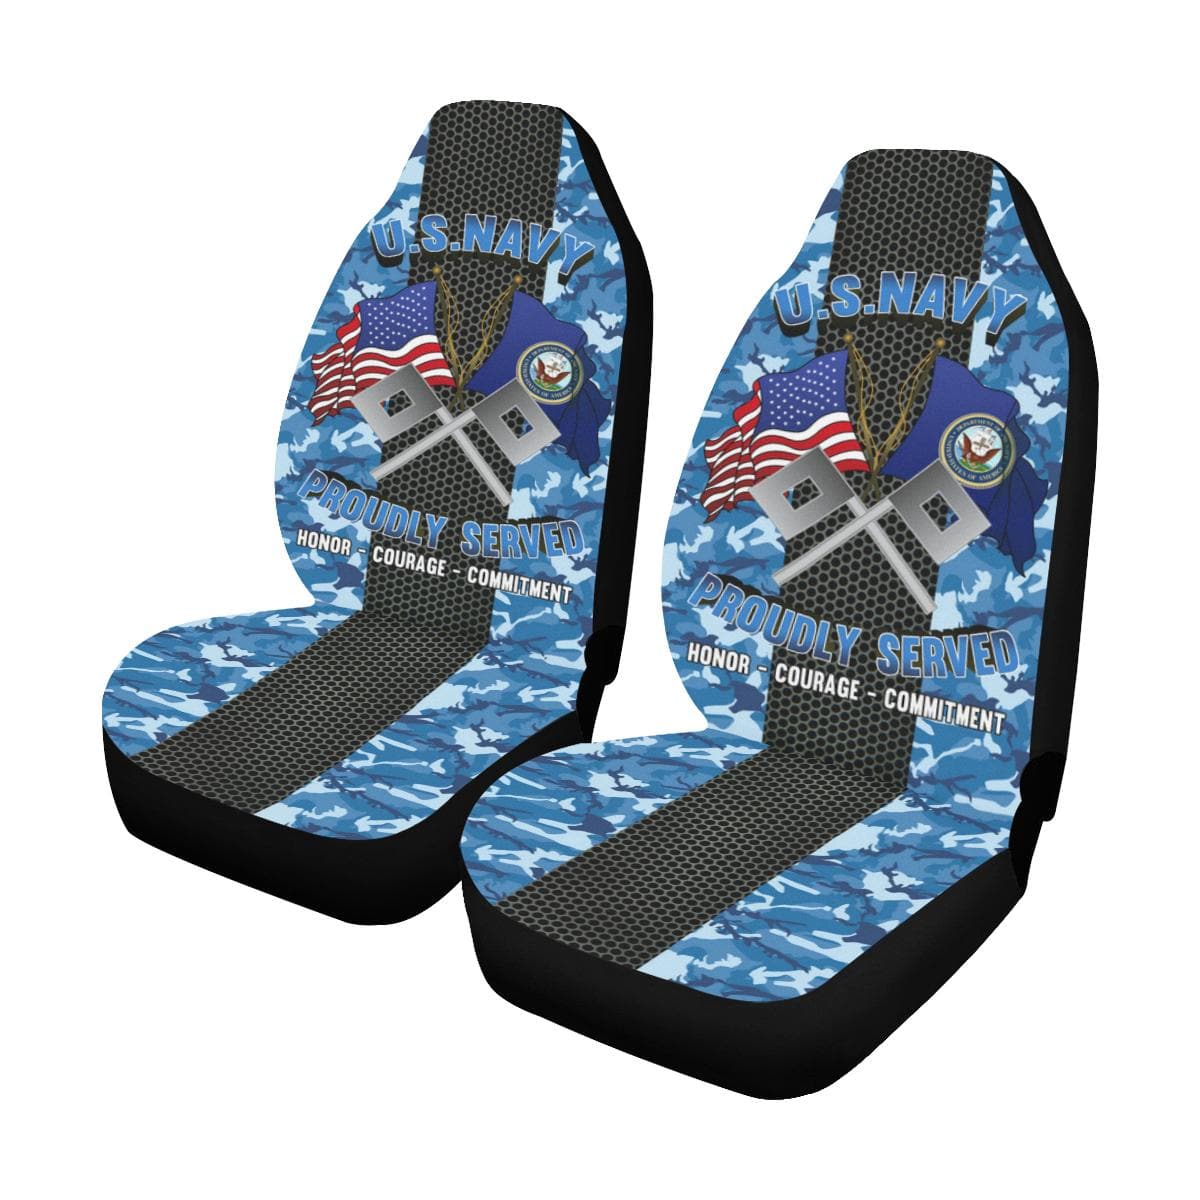 U.S Navy Signalman Navy SN Car Seat Covers (Set of 2)-SeatCovers-Navy-Rate-Veterans Nation